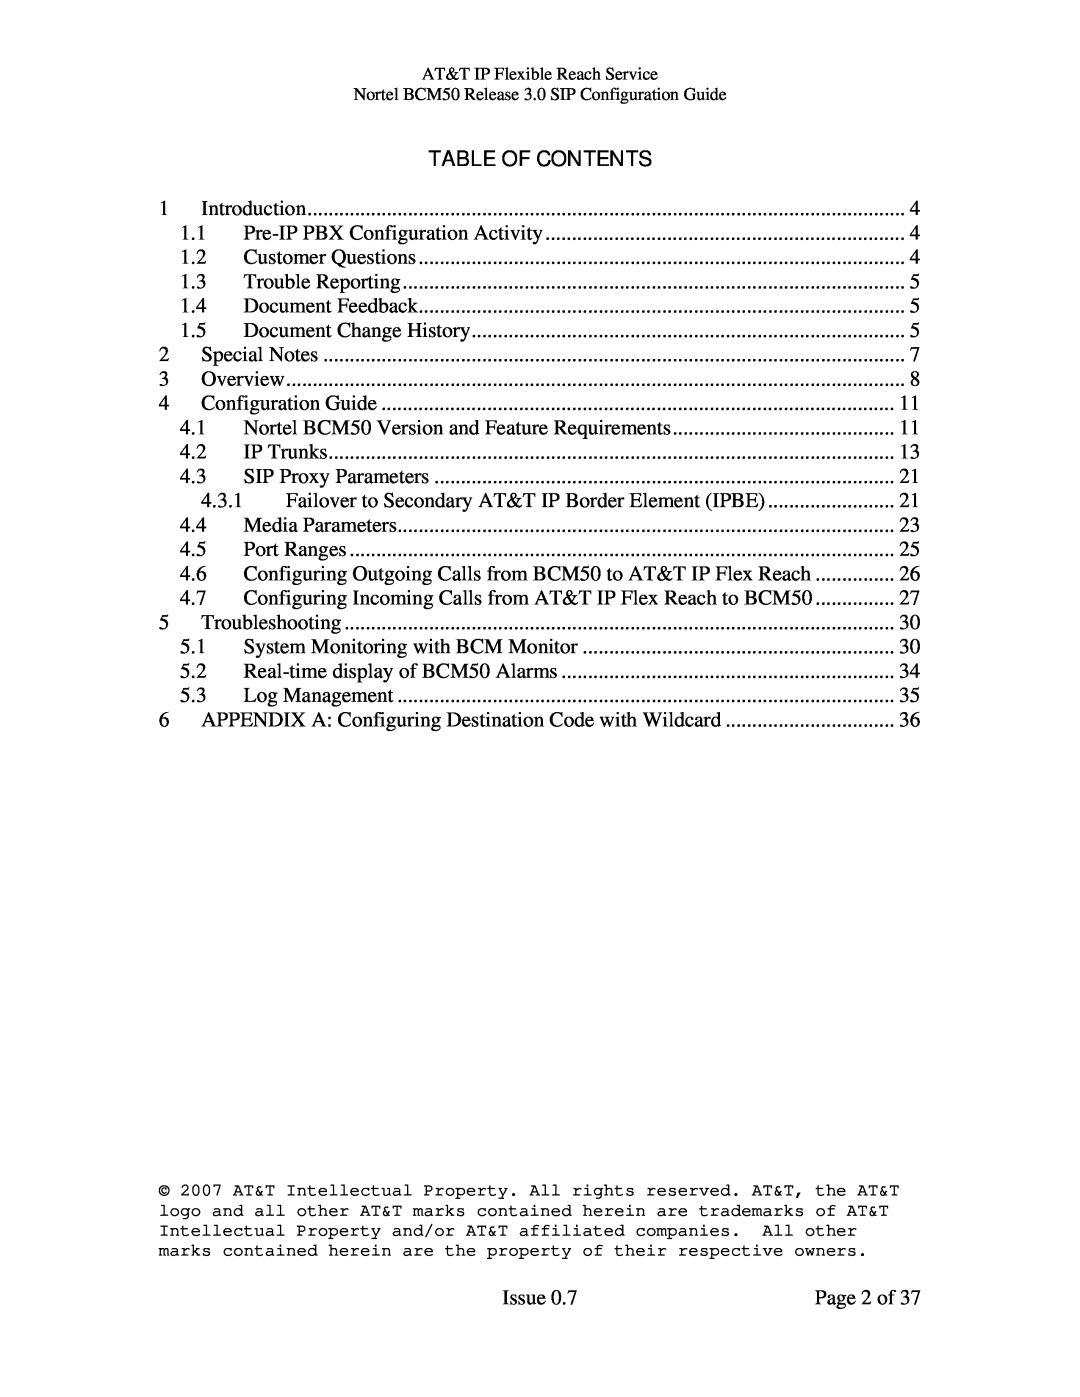 AT&T BCM50 manual Table Of Contents, Special Notes 